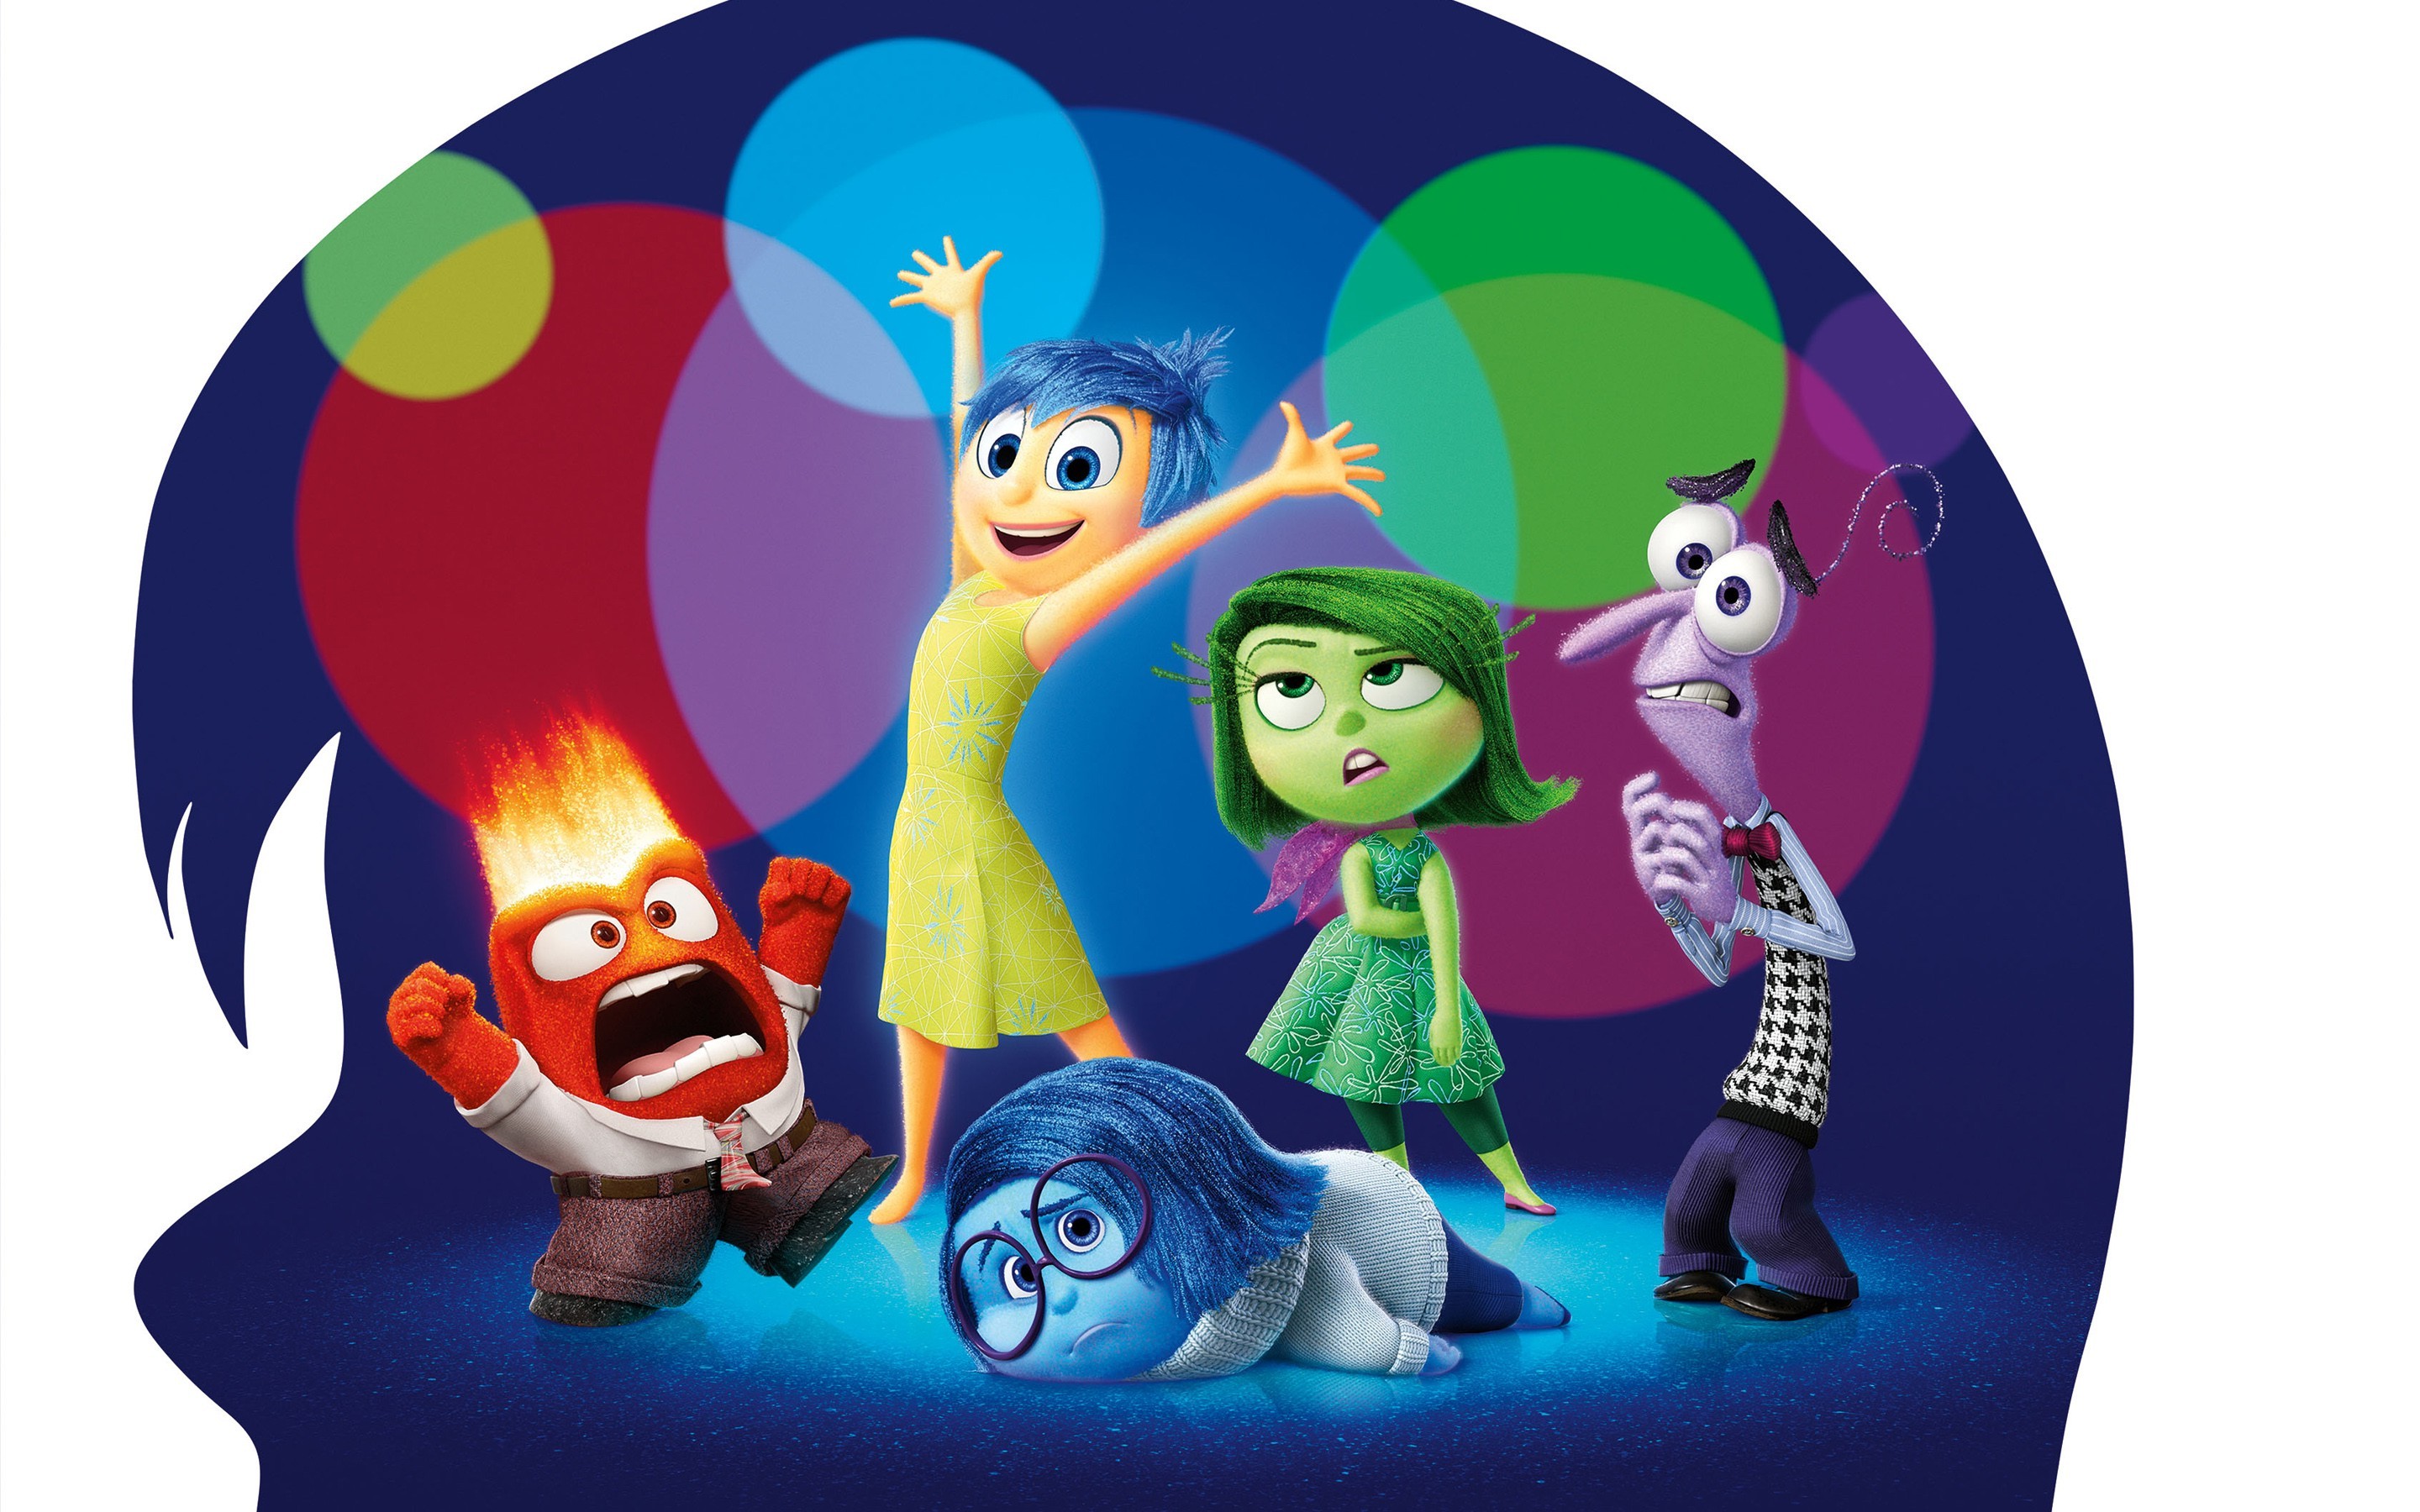 download inside out full movie hd